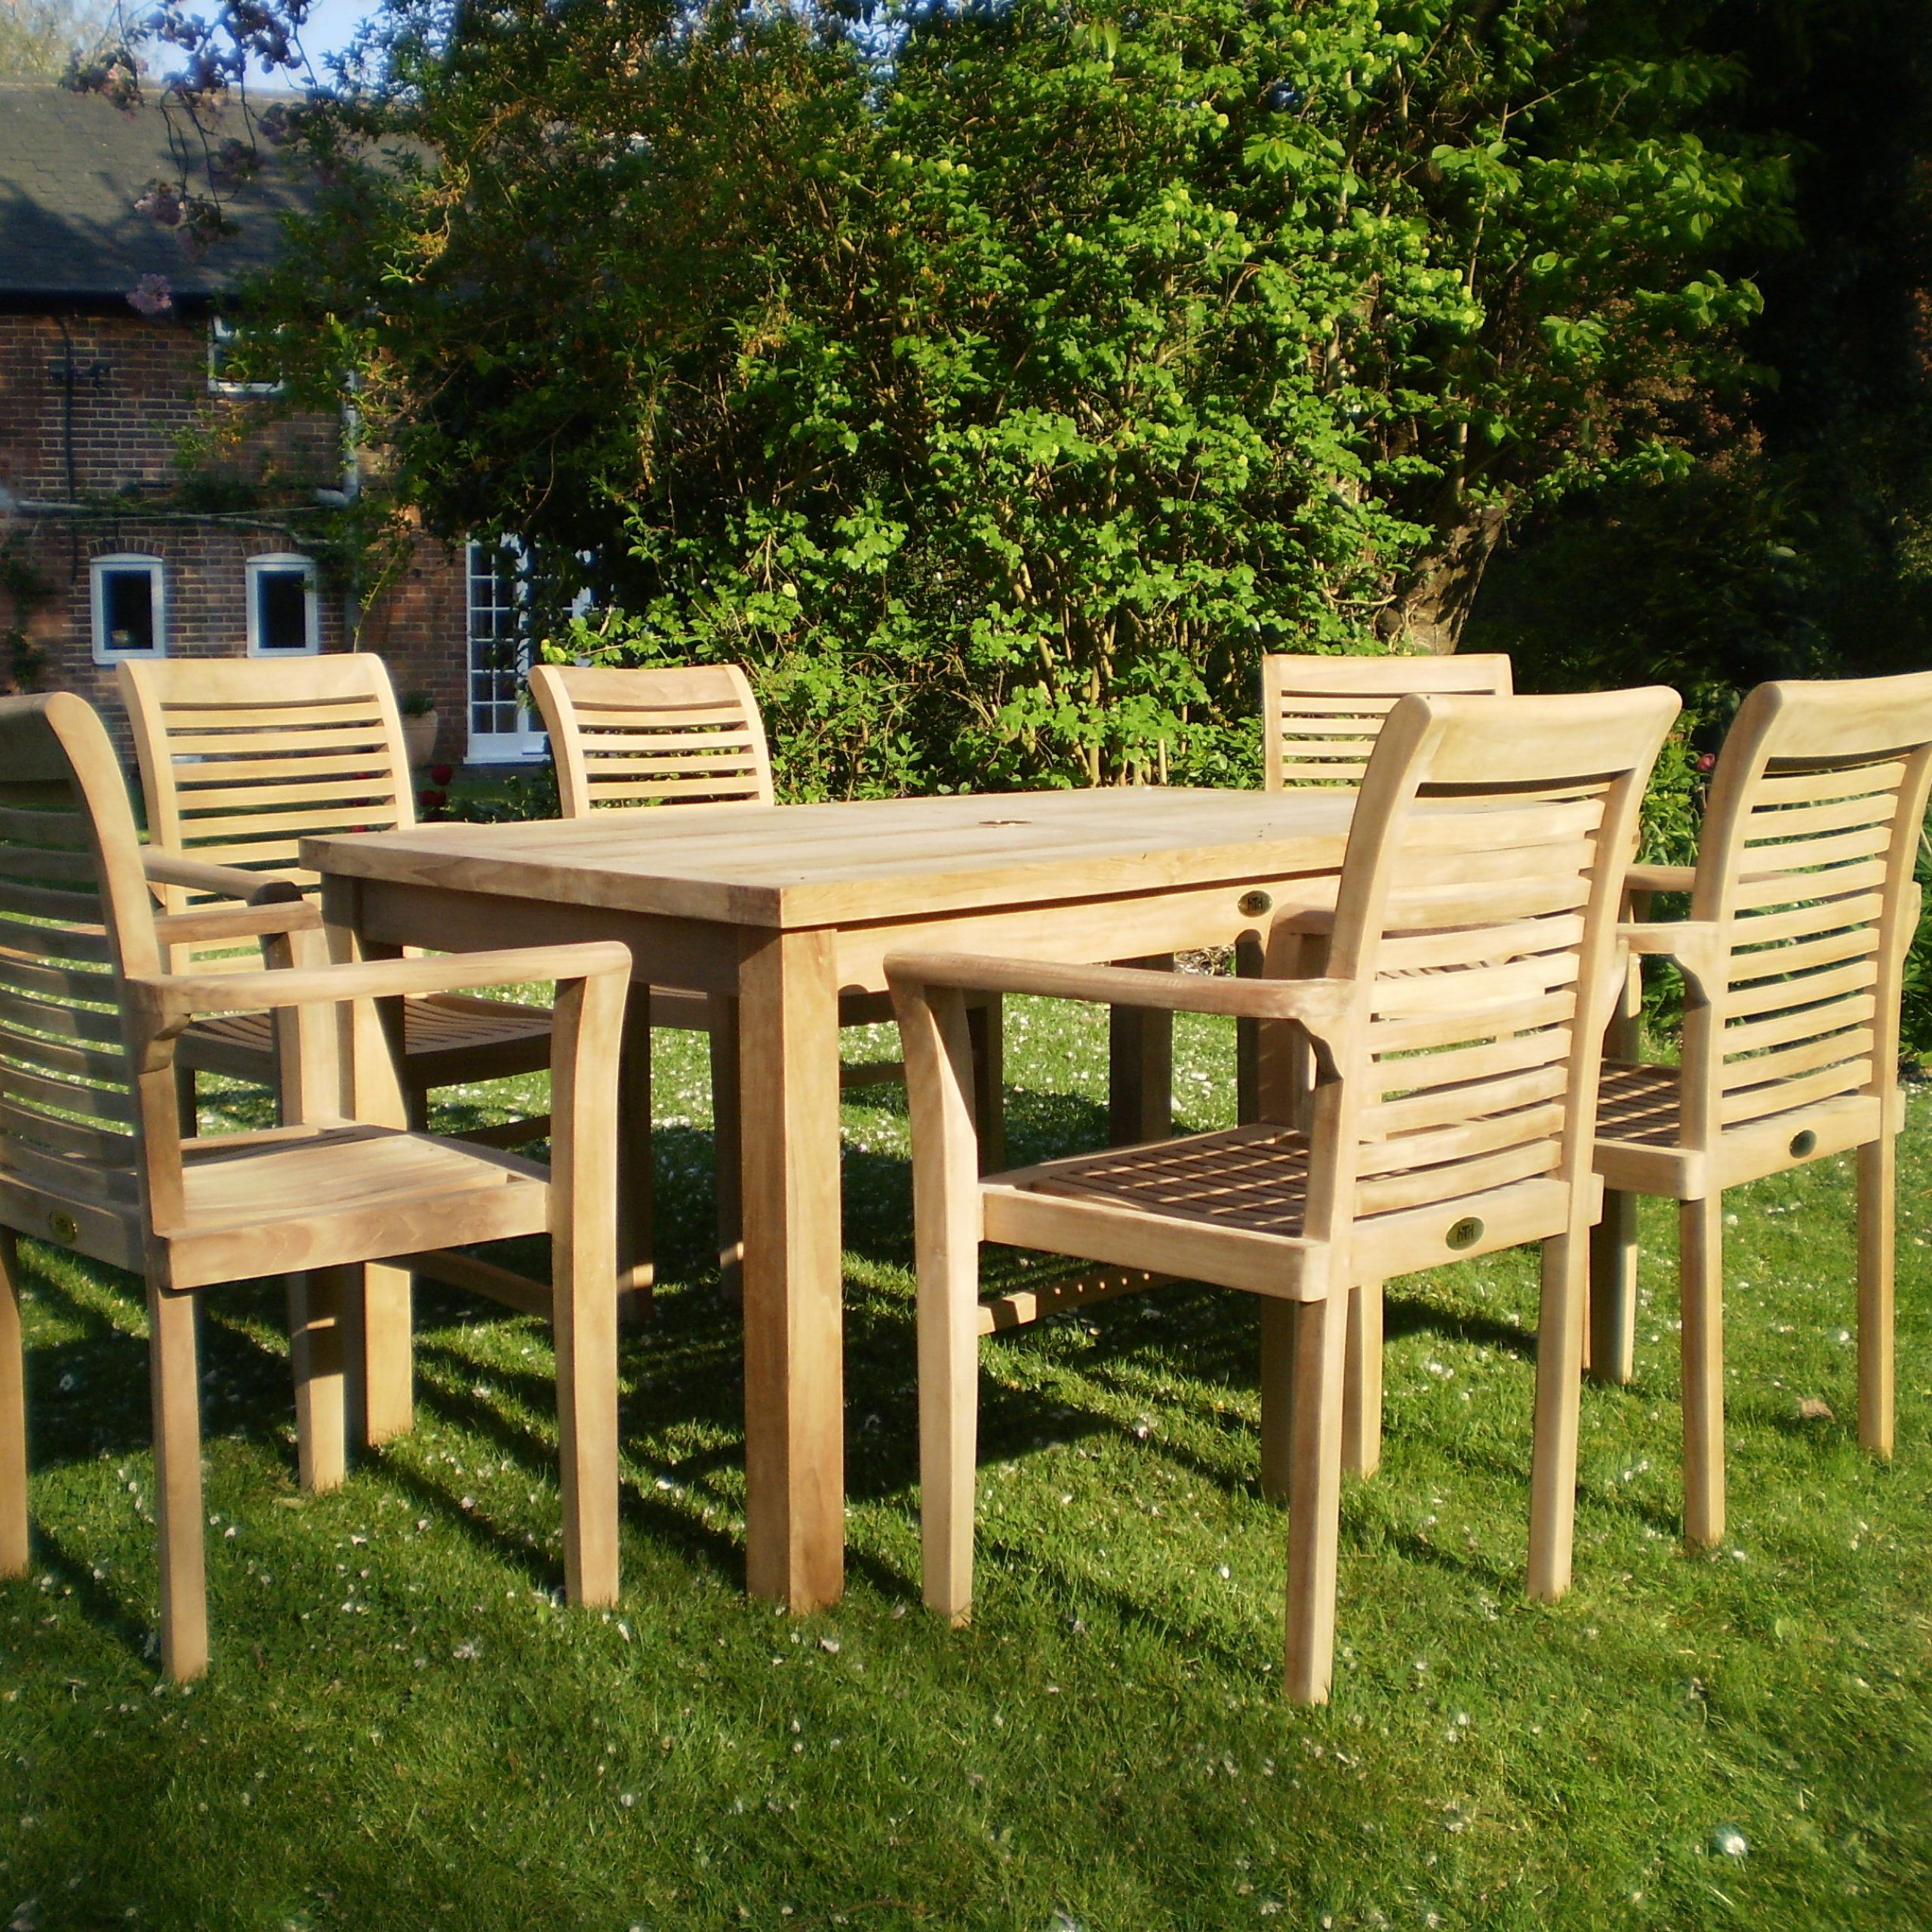 Teak Patio Furniture – Chairs And Tables Uk – Teak Garden Furniture Pertaining To Teak Outdoor Loungers Sets (View 2 of 15)